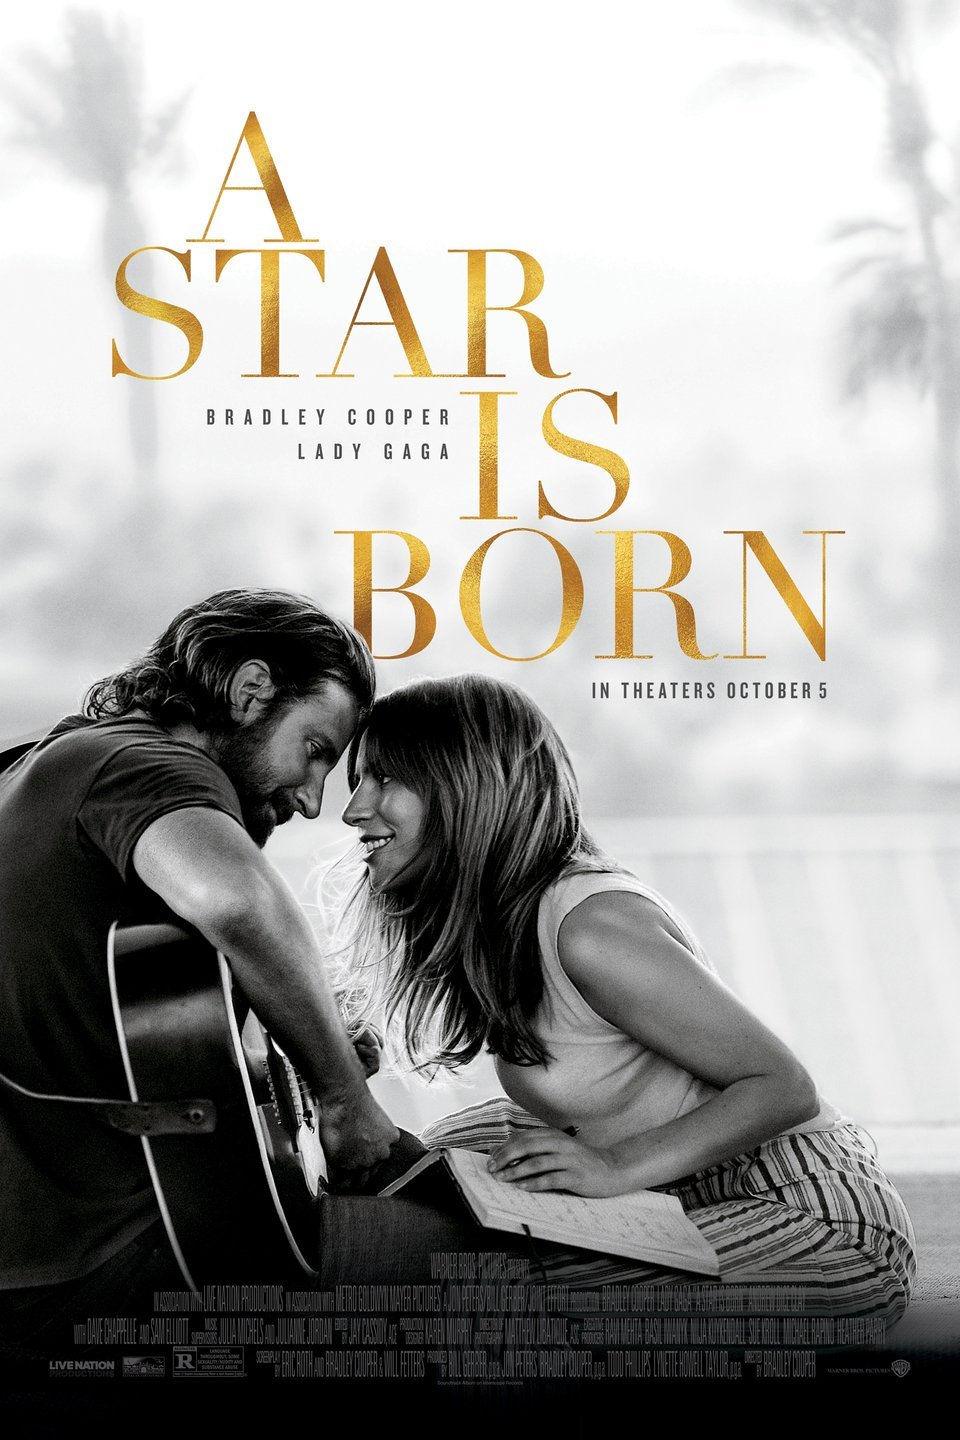 A poster for the movie A Star is Born showing a man playing a guitar and a woman looking into his eyes. 